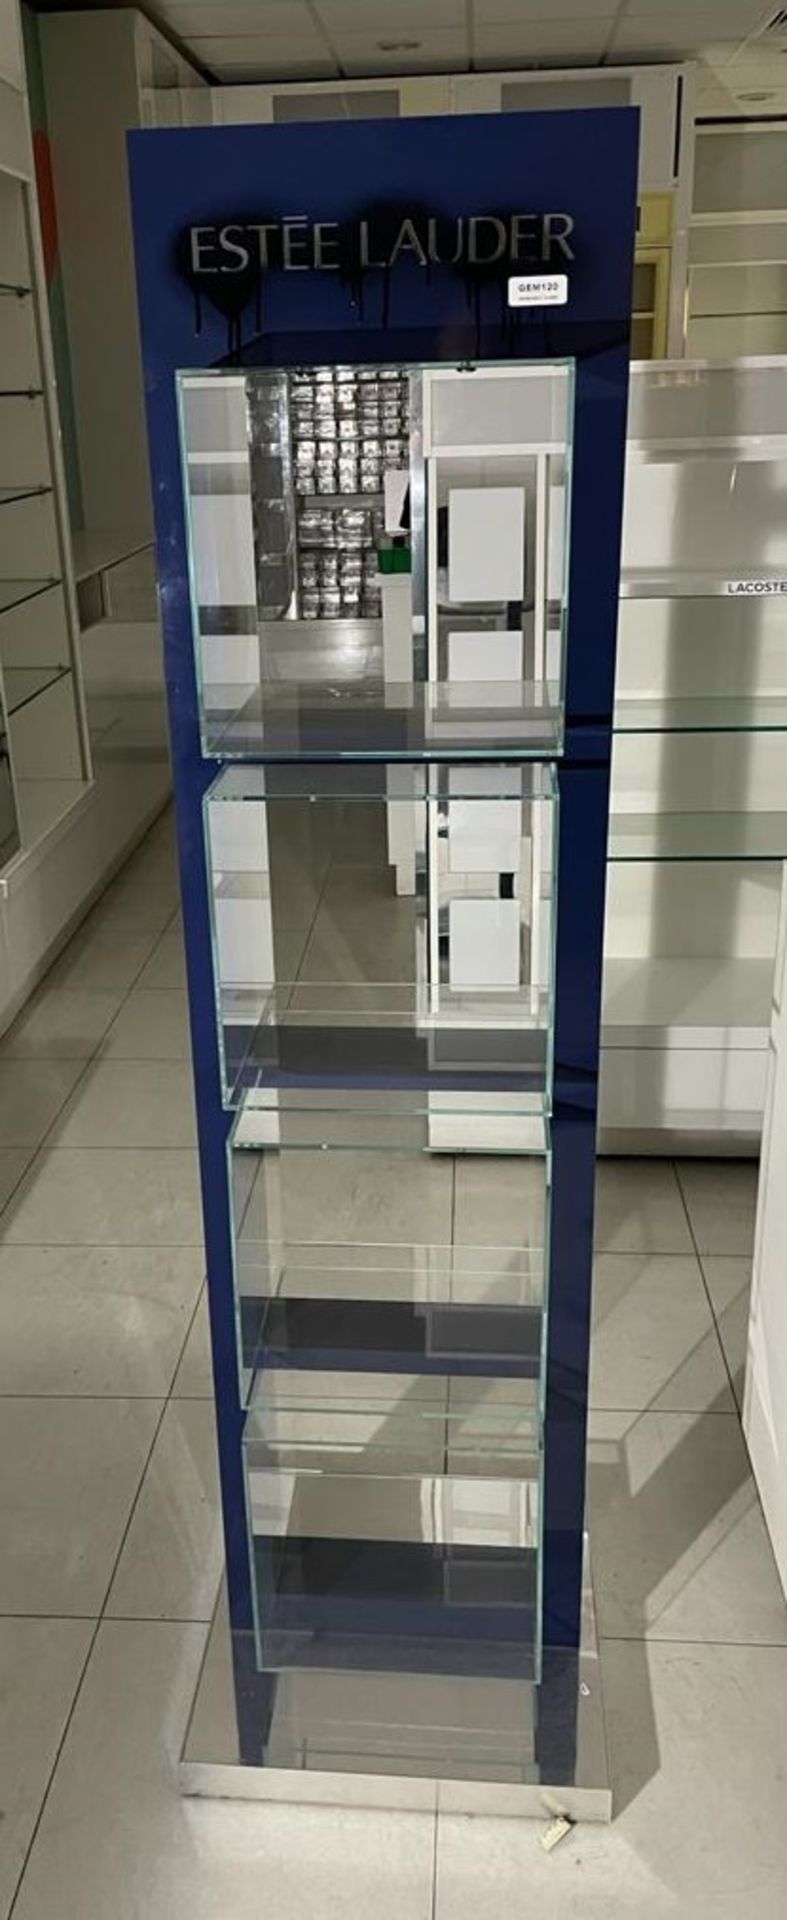 1 x Estee Lauder Free Standing Retail Display Unit With Glass Cube Display Shelves - Size H175 x W49 - Image 5 of 8